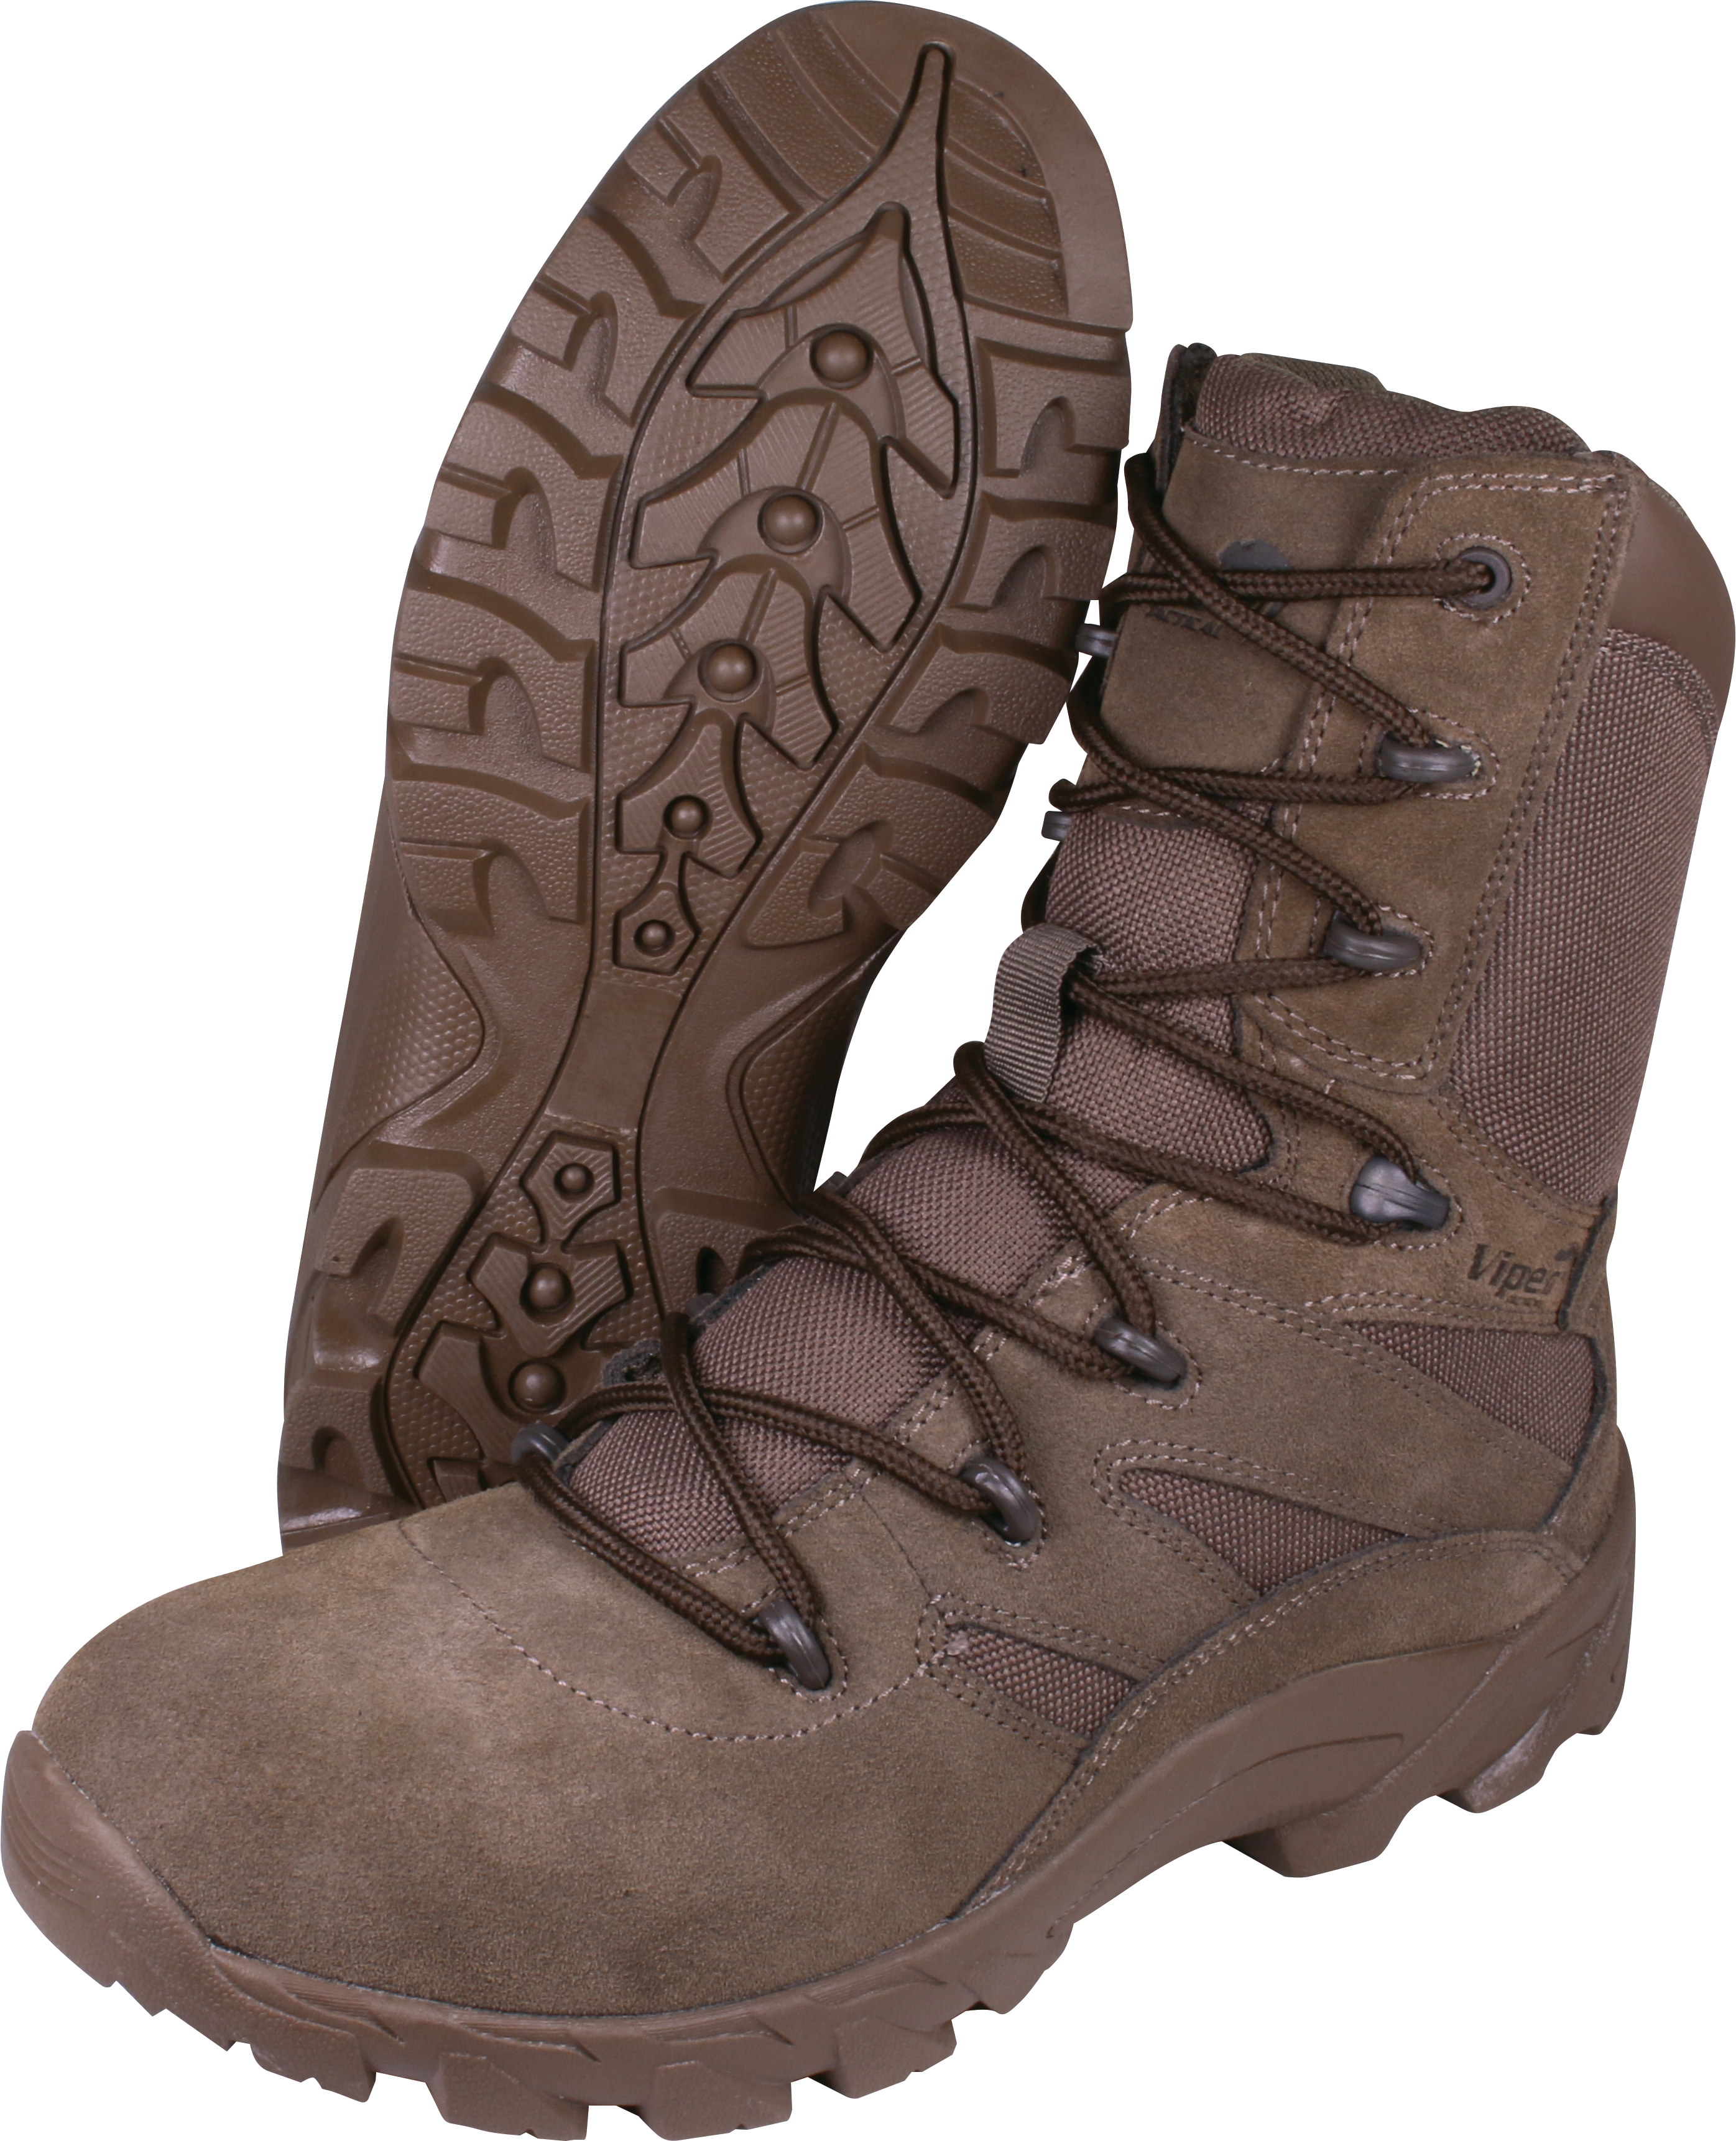 Viper Tactical Covert Boots Brown